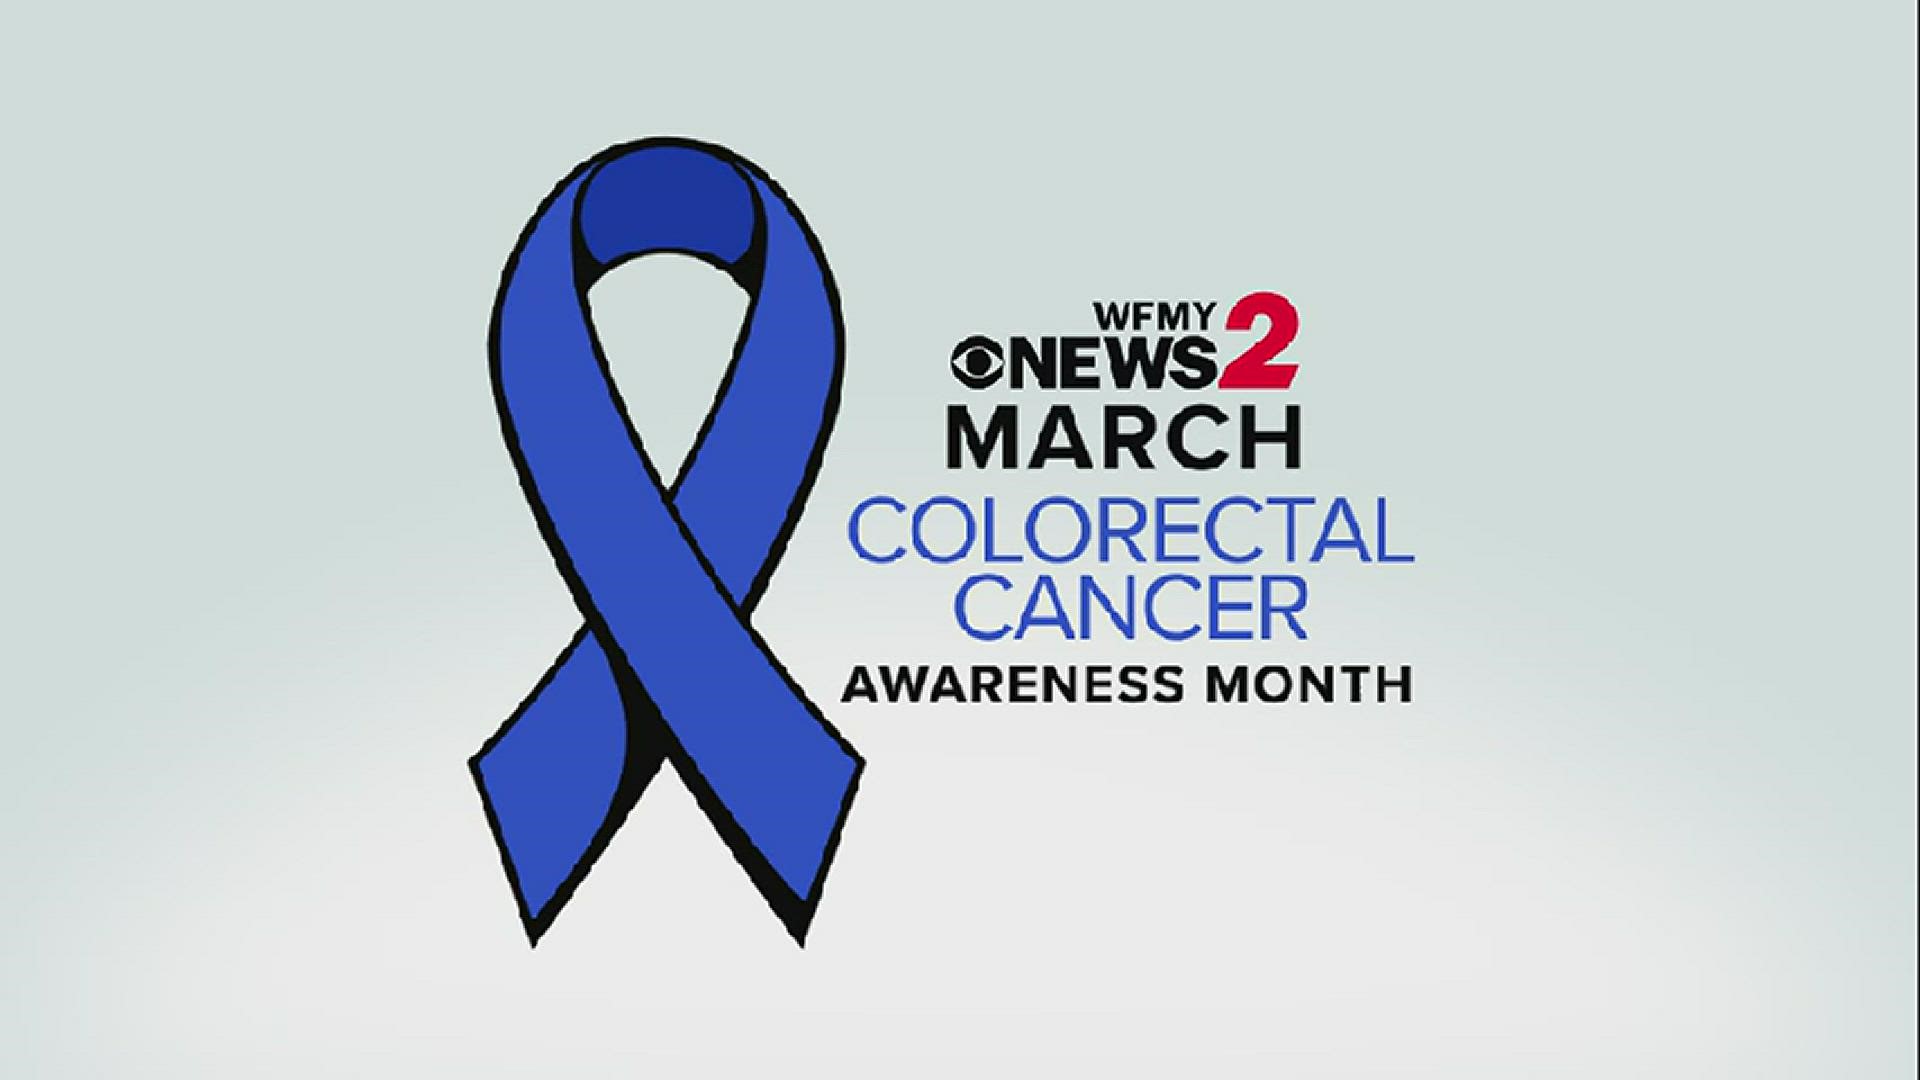 Remember to get screened for colon cancer.